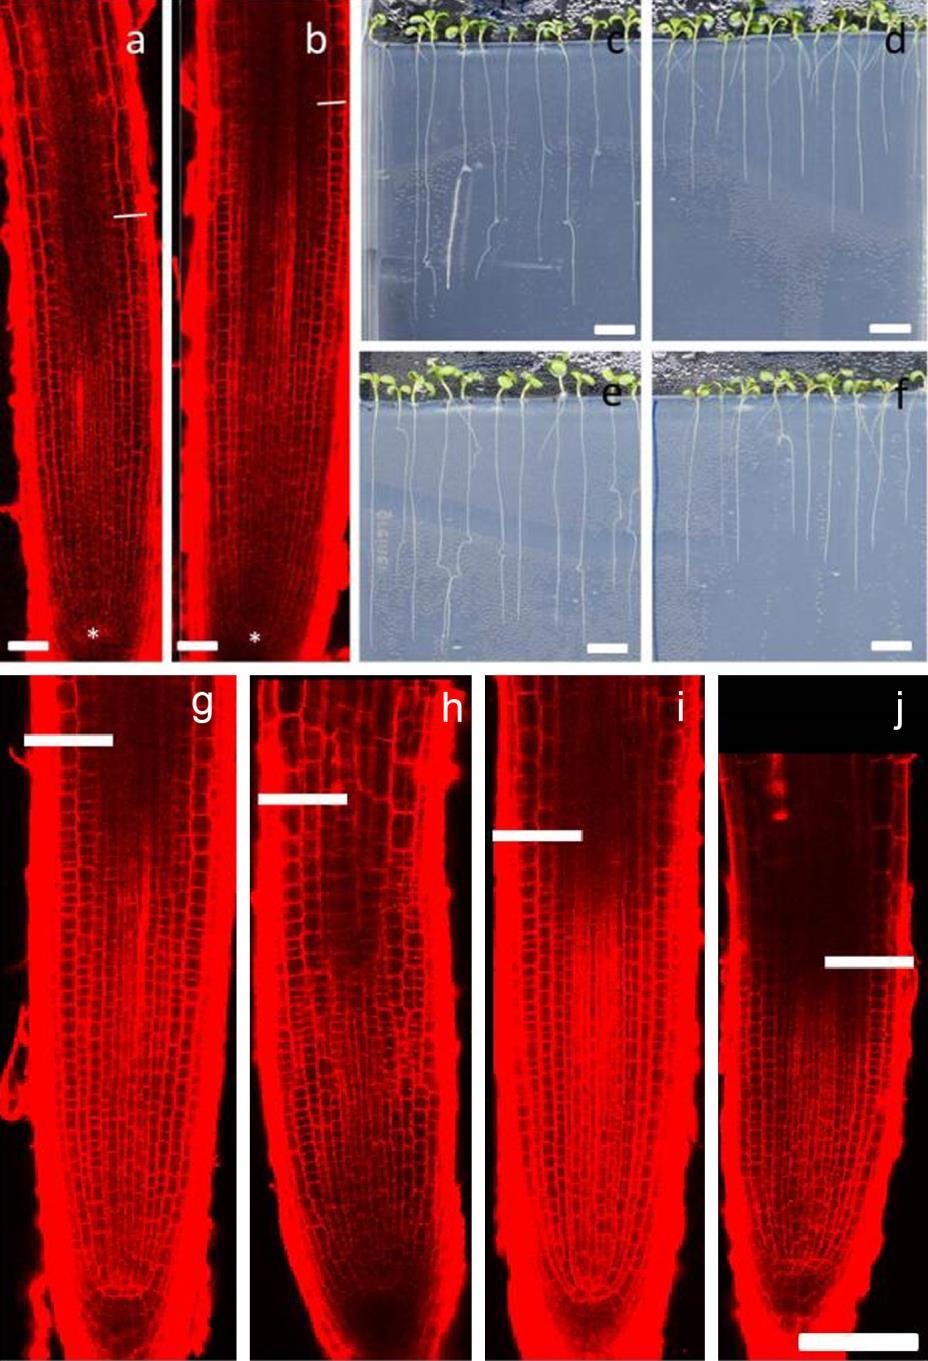 Figure S5. Related to Figure 4 for strigolactone effects on root tip morphology. Quantification of root meristematic cells in WT and pdr1 root tips.